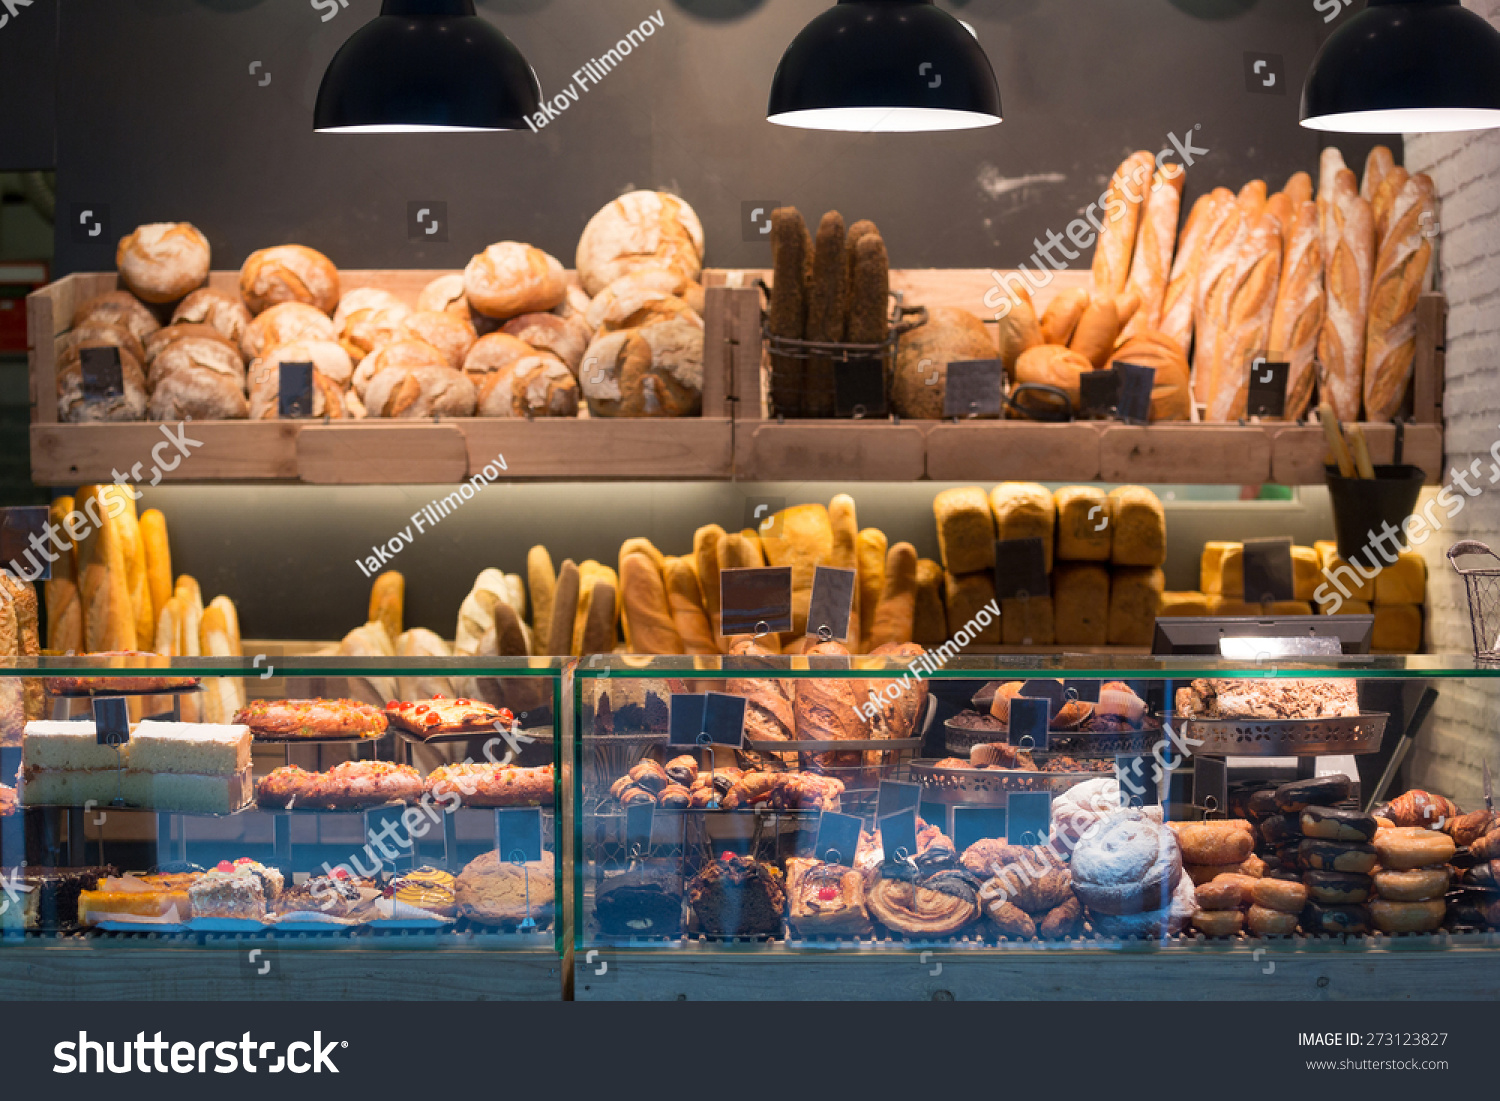 Modern bakery with different kinds of bread, cakes and buns   #273123827